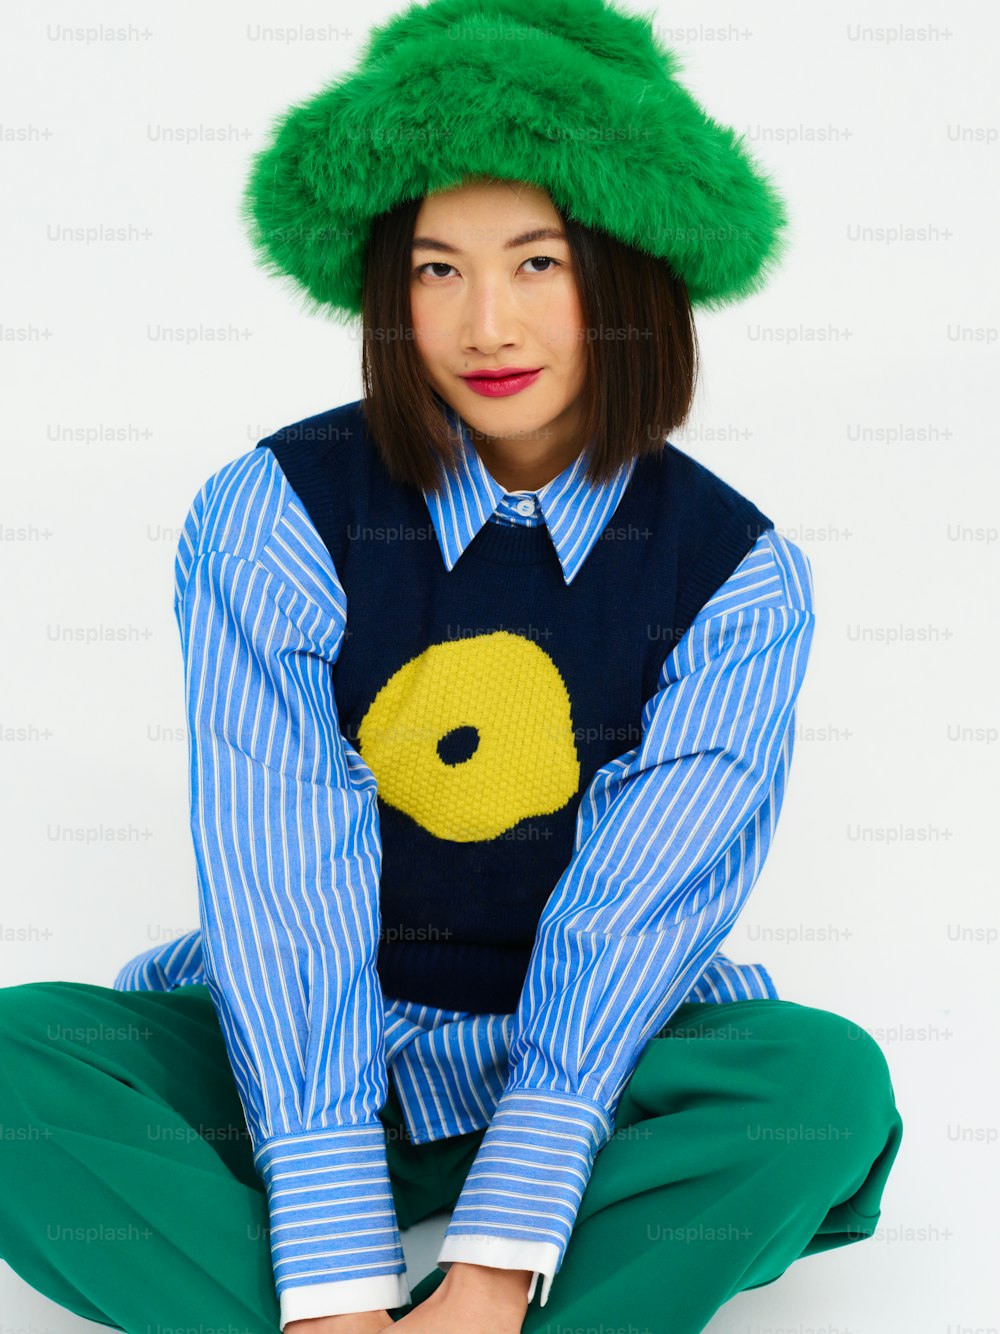 a woman wearing a green hat and a blue shirt